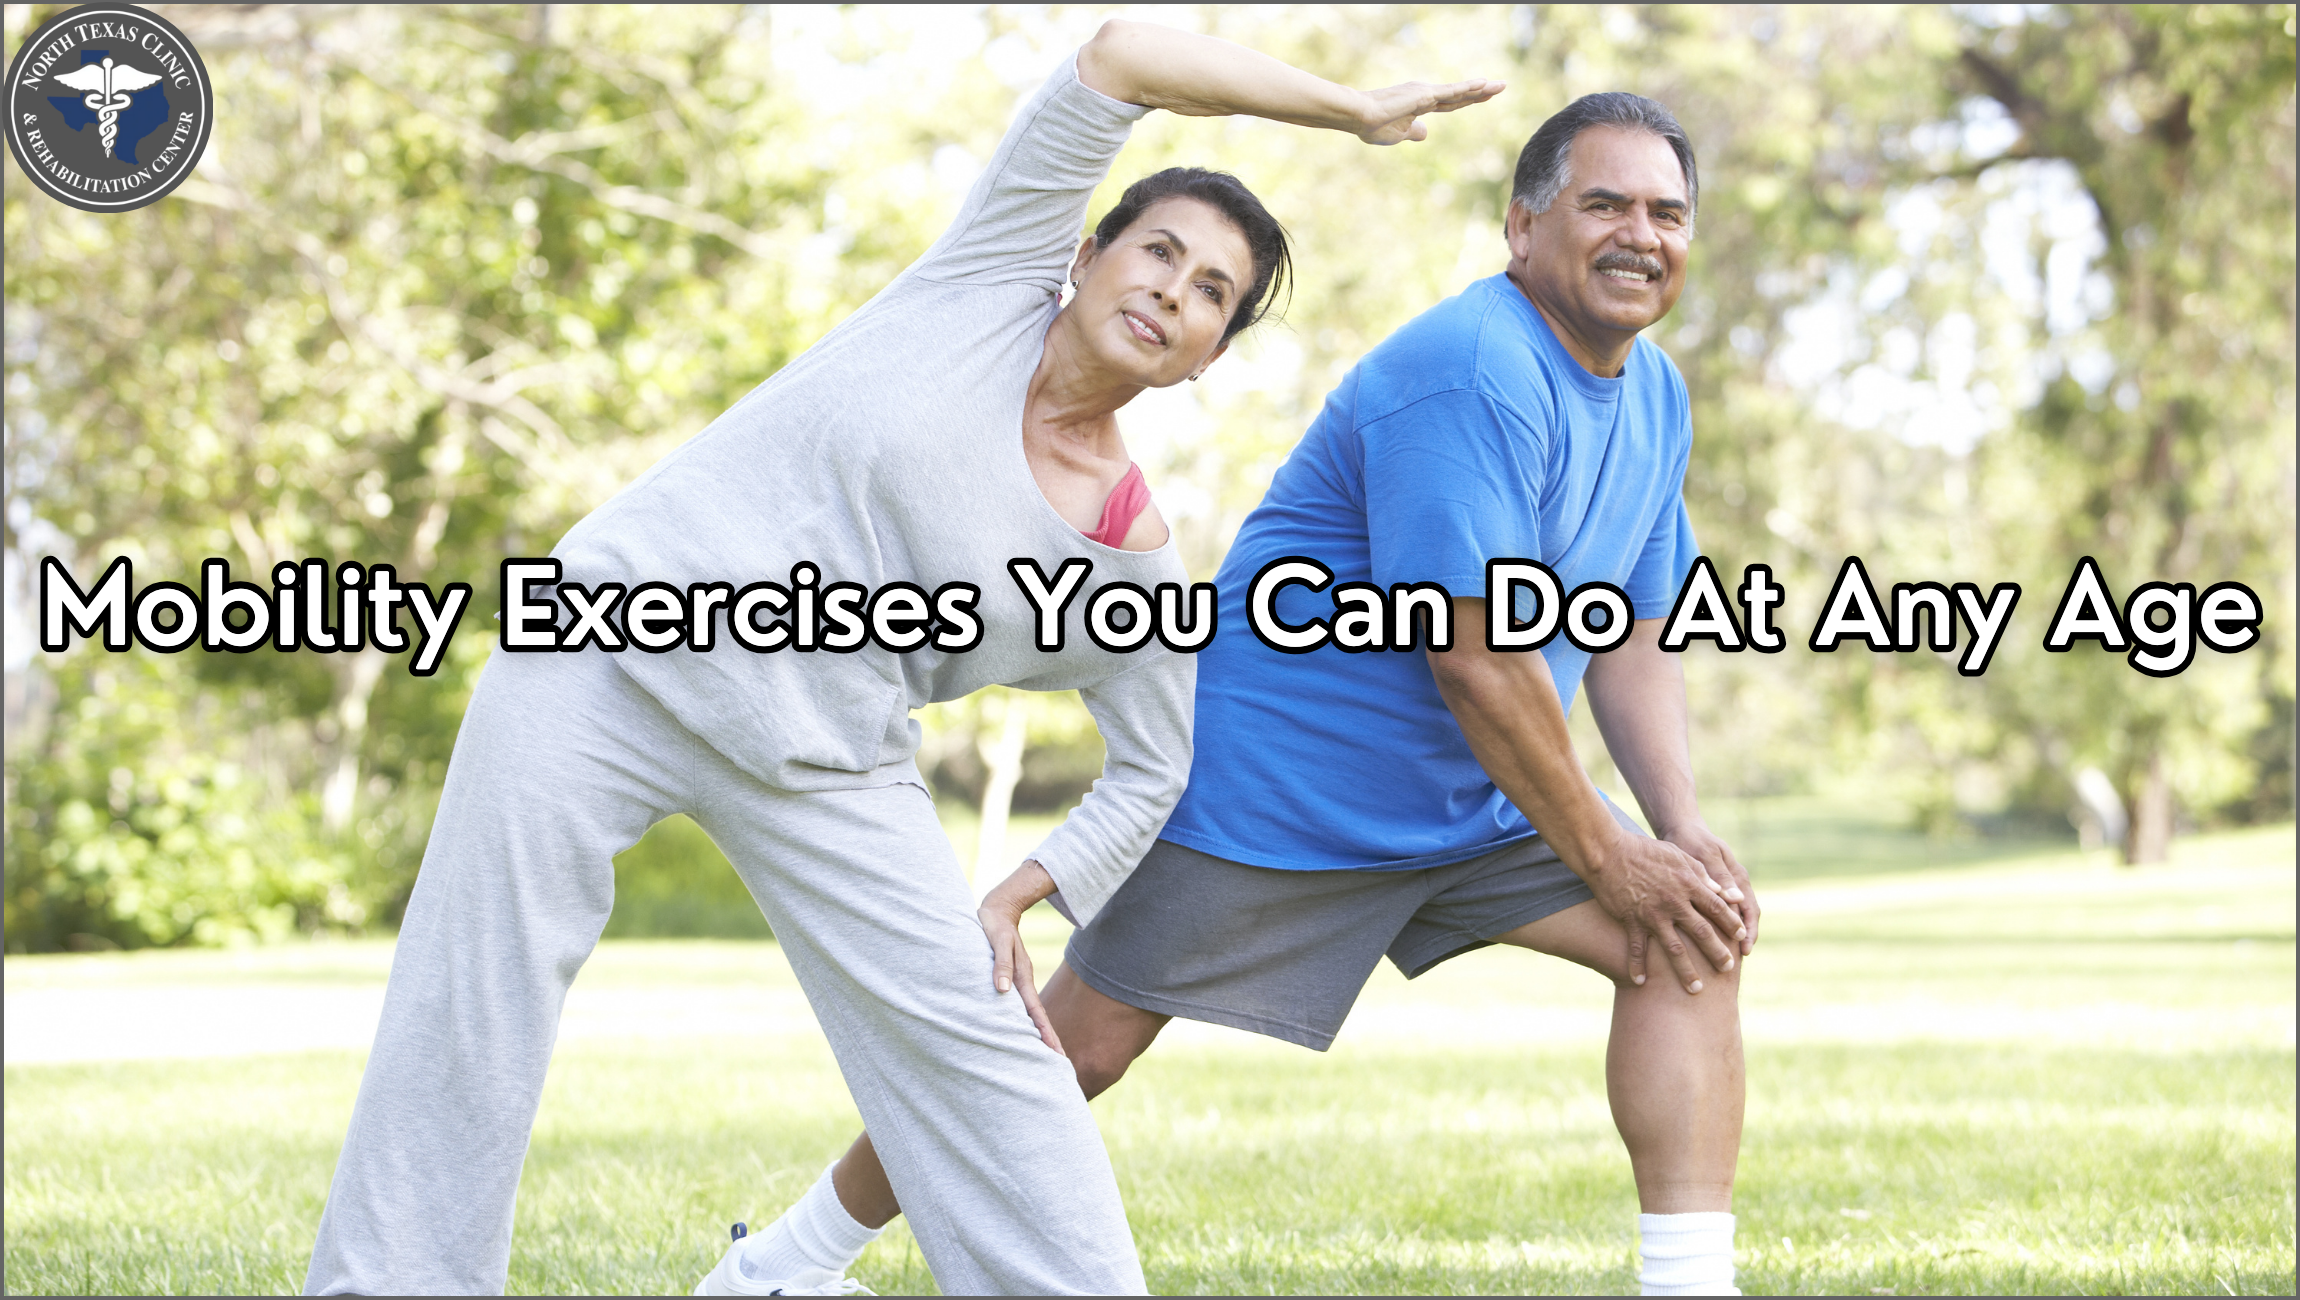 Mobility Exercises You Can Do At Any Age (header)